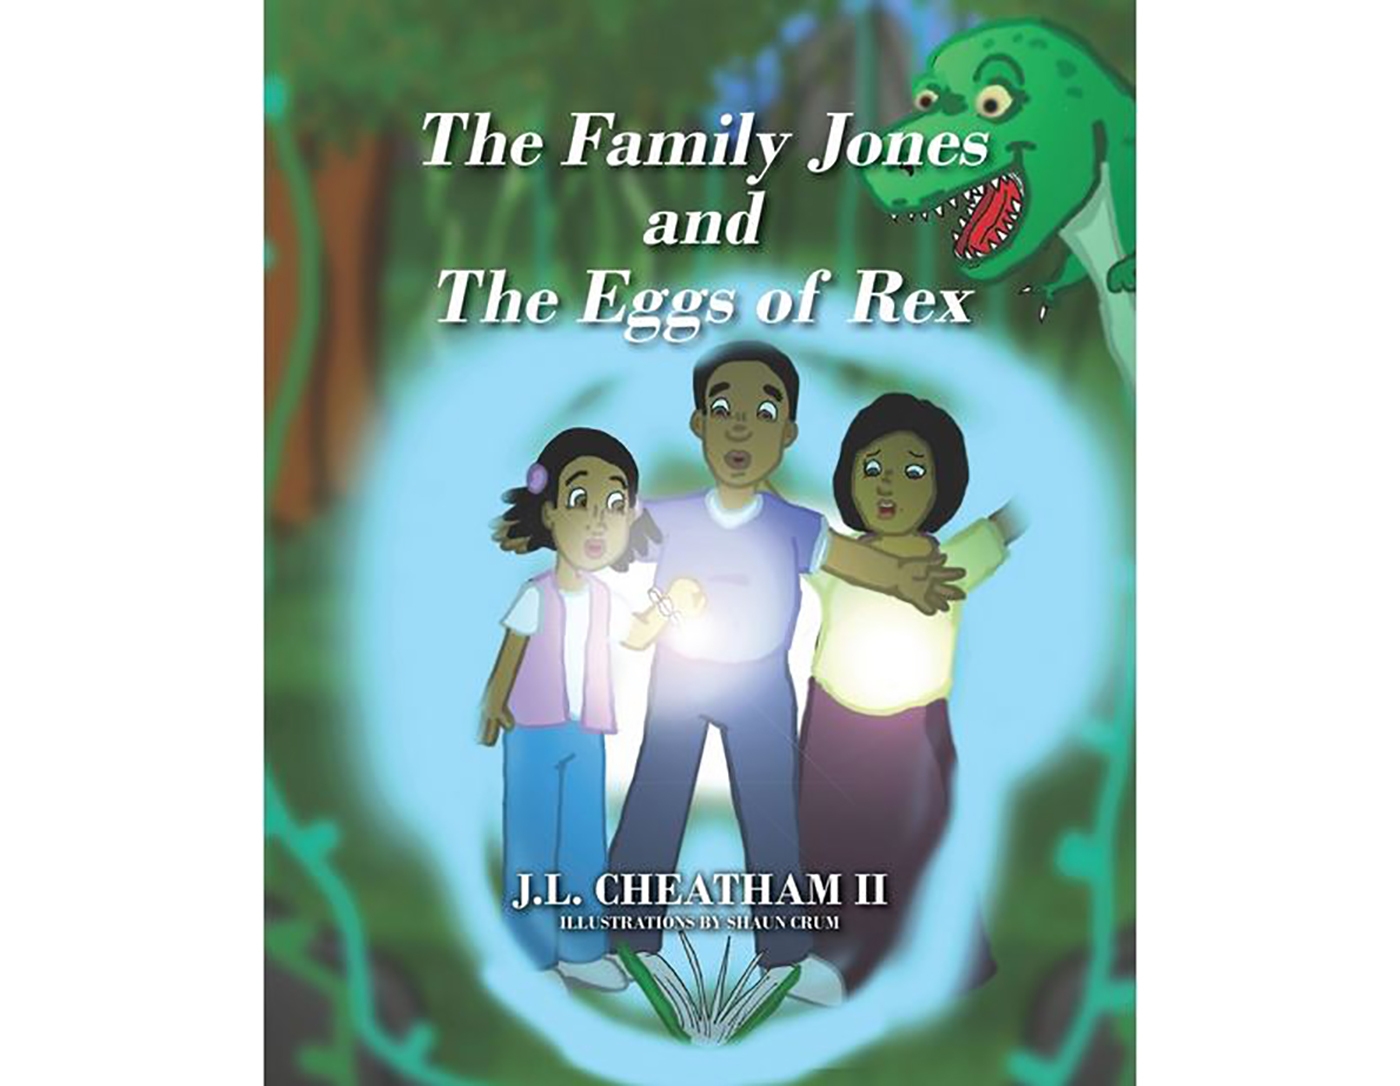 The book cover of The Family Jones and The Eggs of Rex by J.L. Cheatham II. It features a family (mother, father, and daughter) looking at a bright light. 